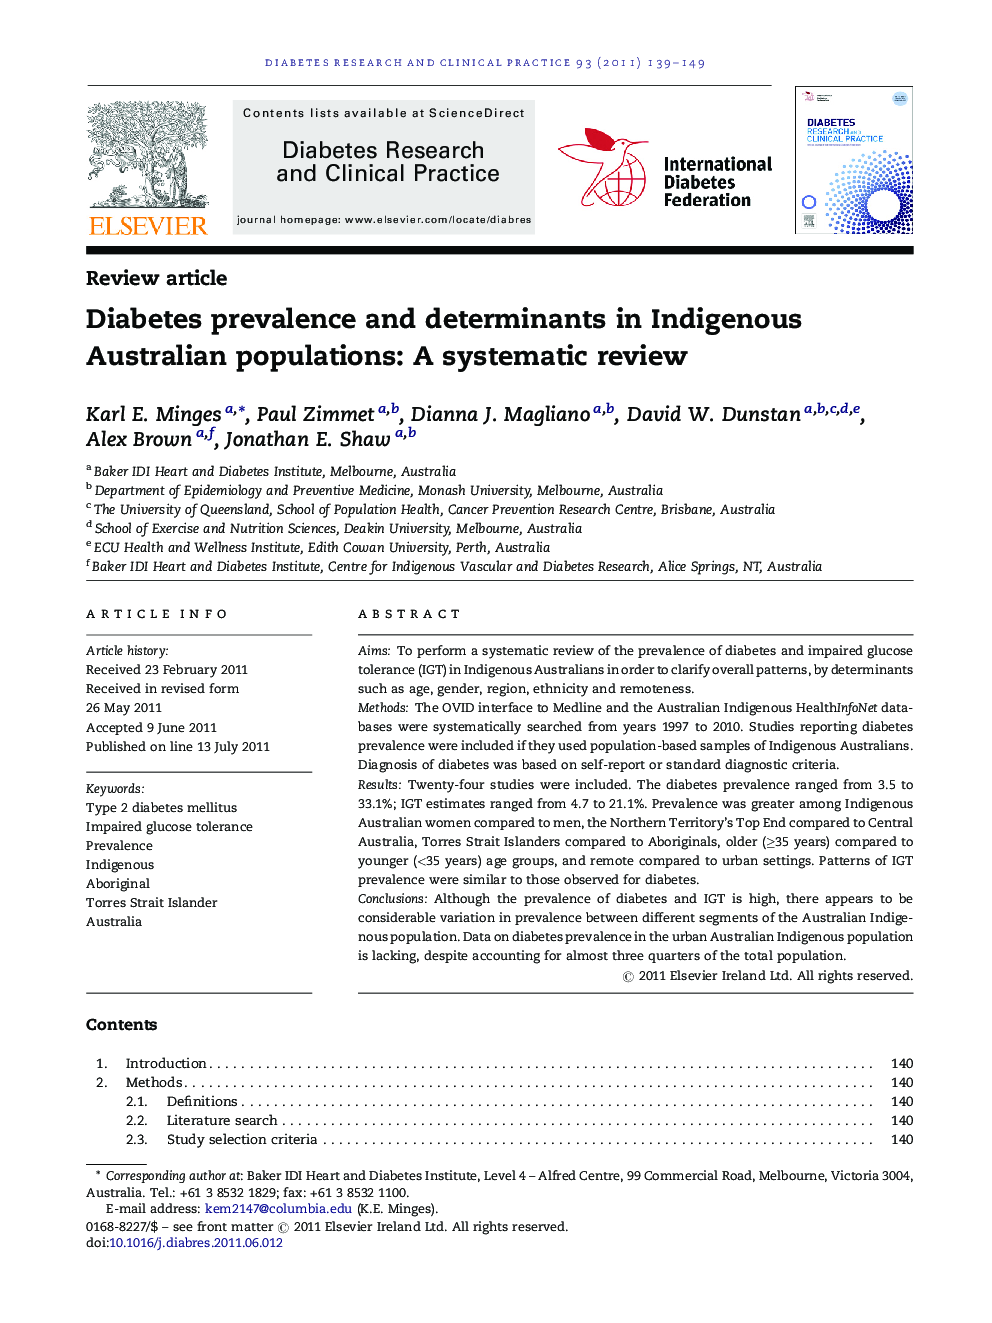 Diabetes prevalence and determinants in Indigenous Australian populations: A systematic review